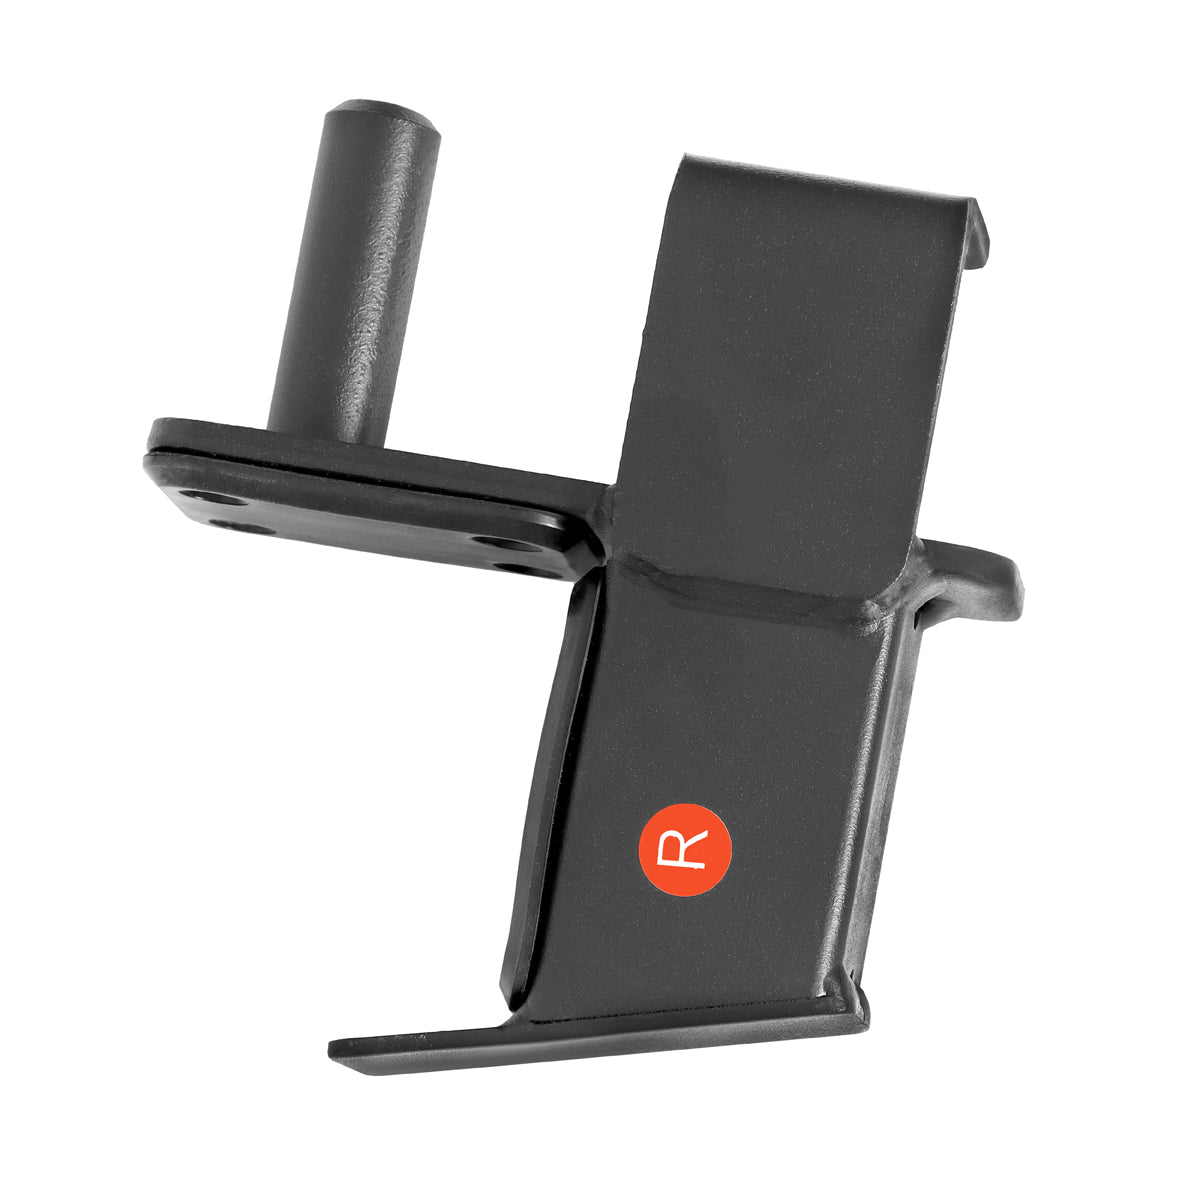 SYL Fitness J-Hooks for Squat/Power Rack - Available in 2x2 and 3x3,  Heavy Duty J-Cups Barbell Holder with UHMV Pads